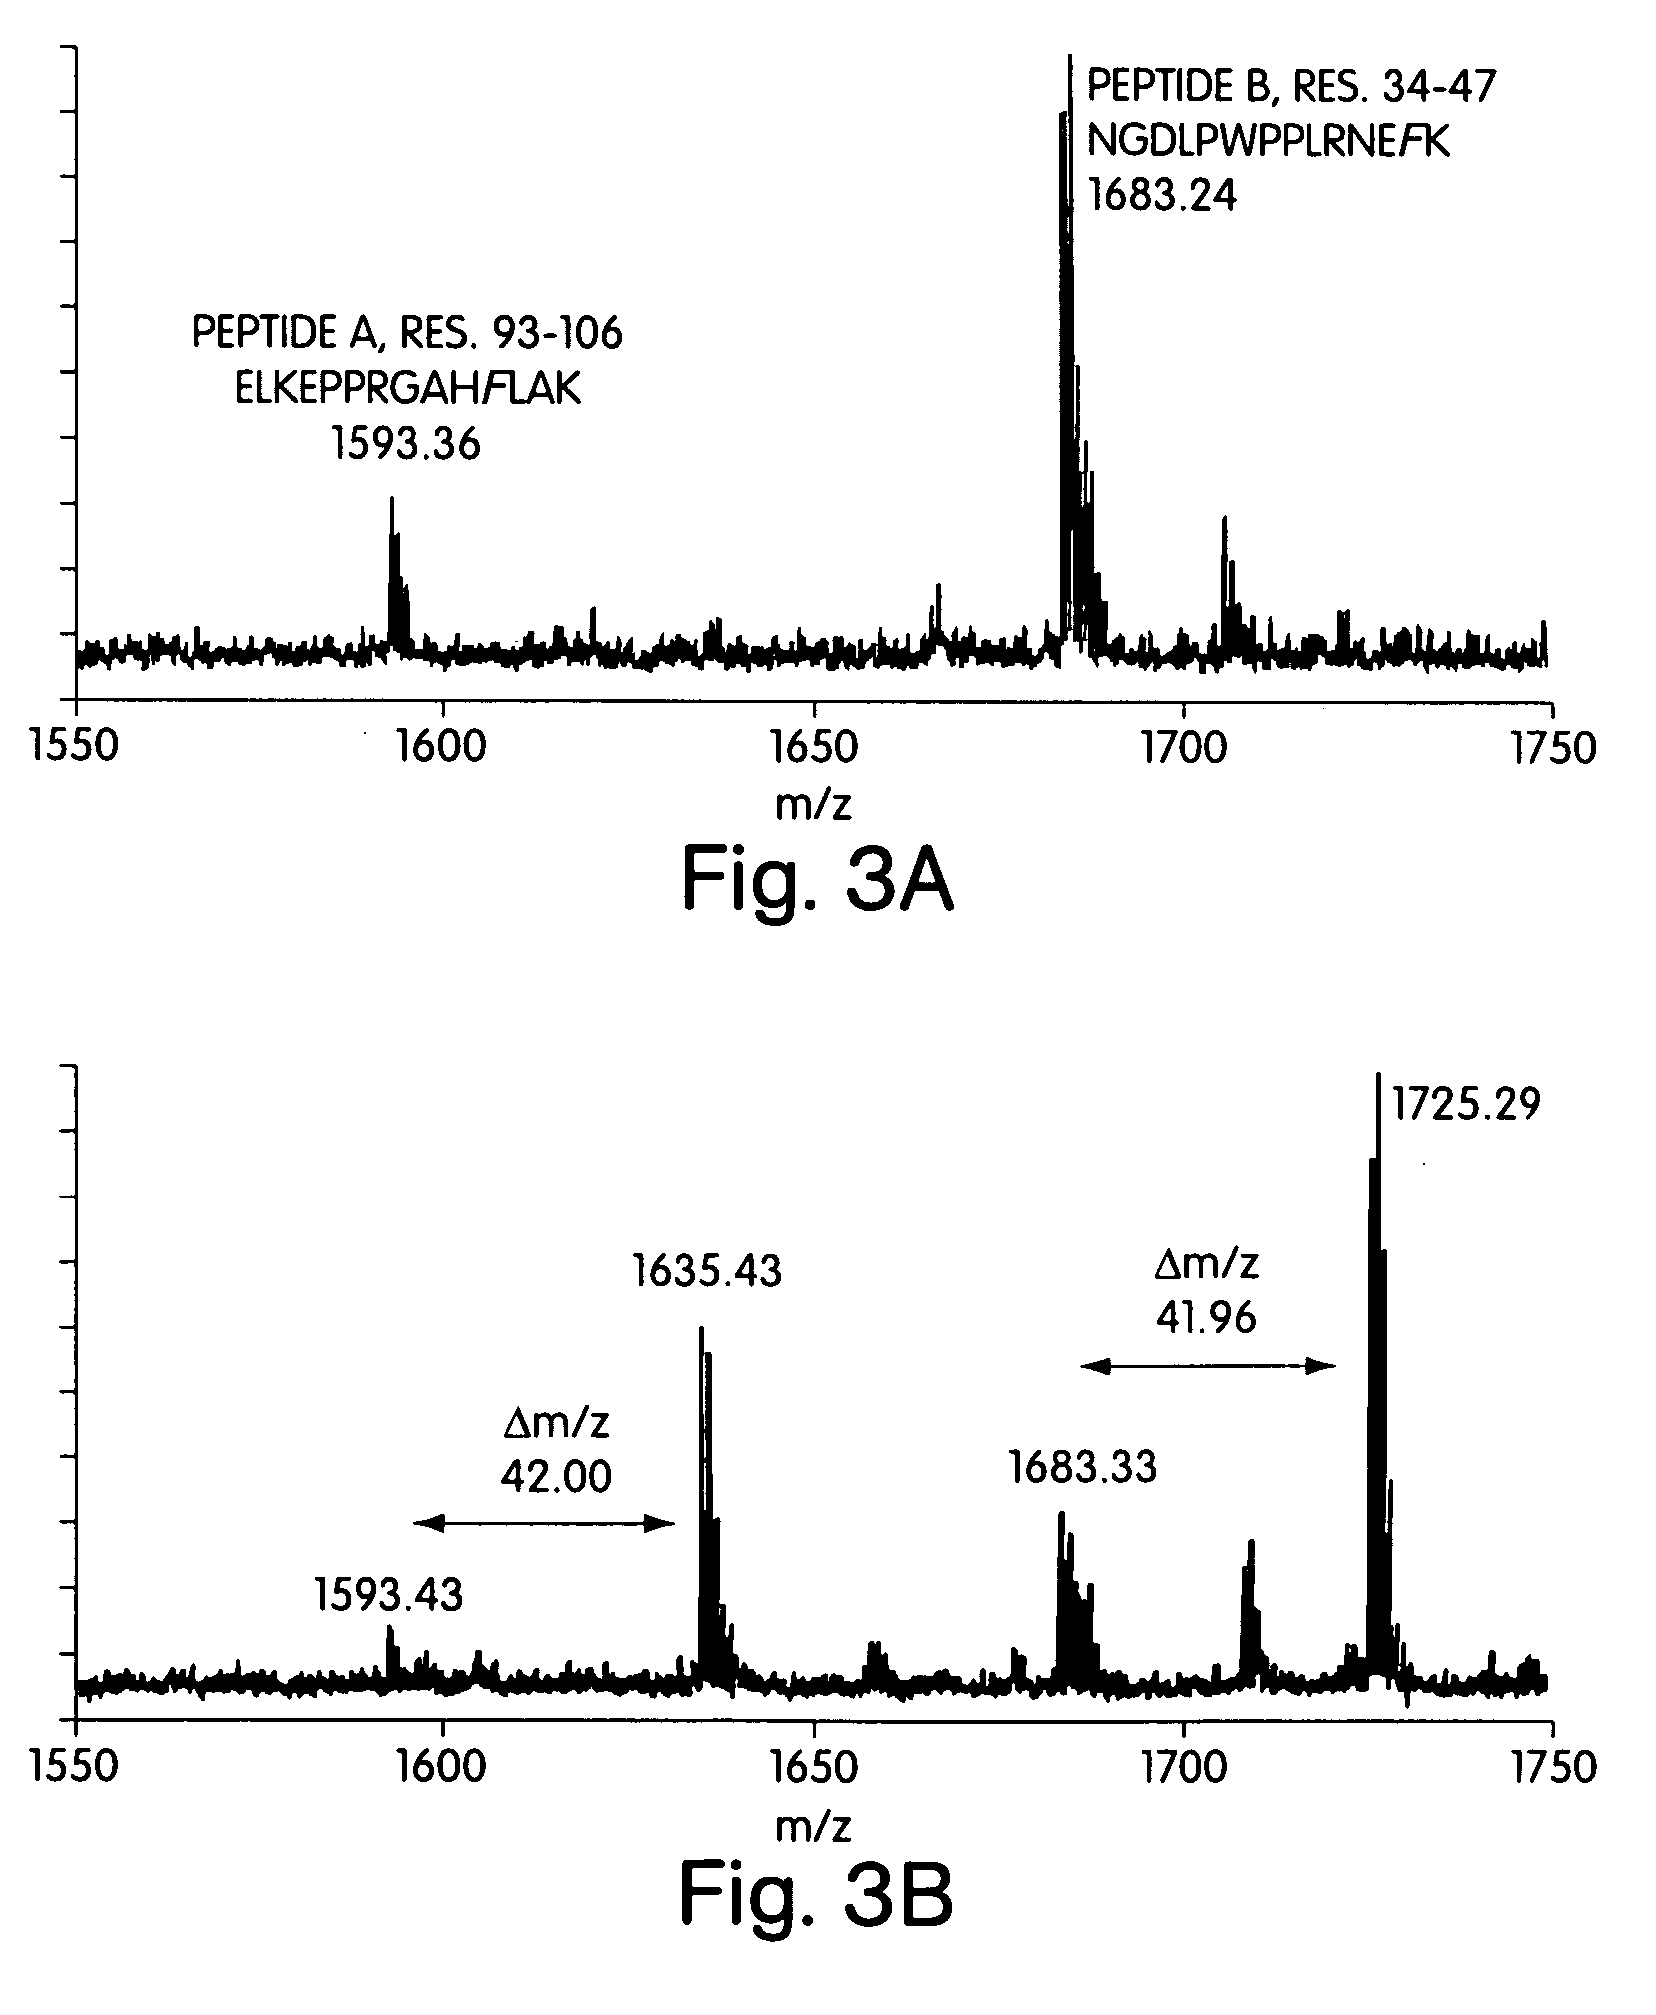 Computational method for designing enzymes for incorporation of amino acid analogs into proteins